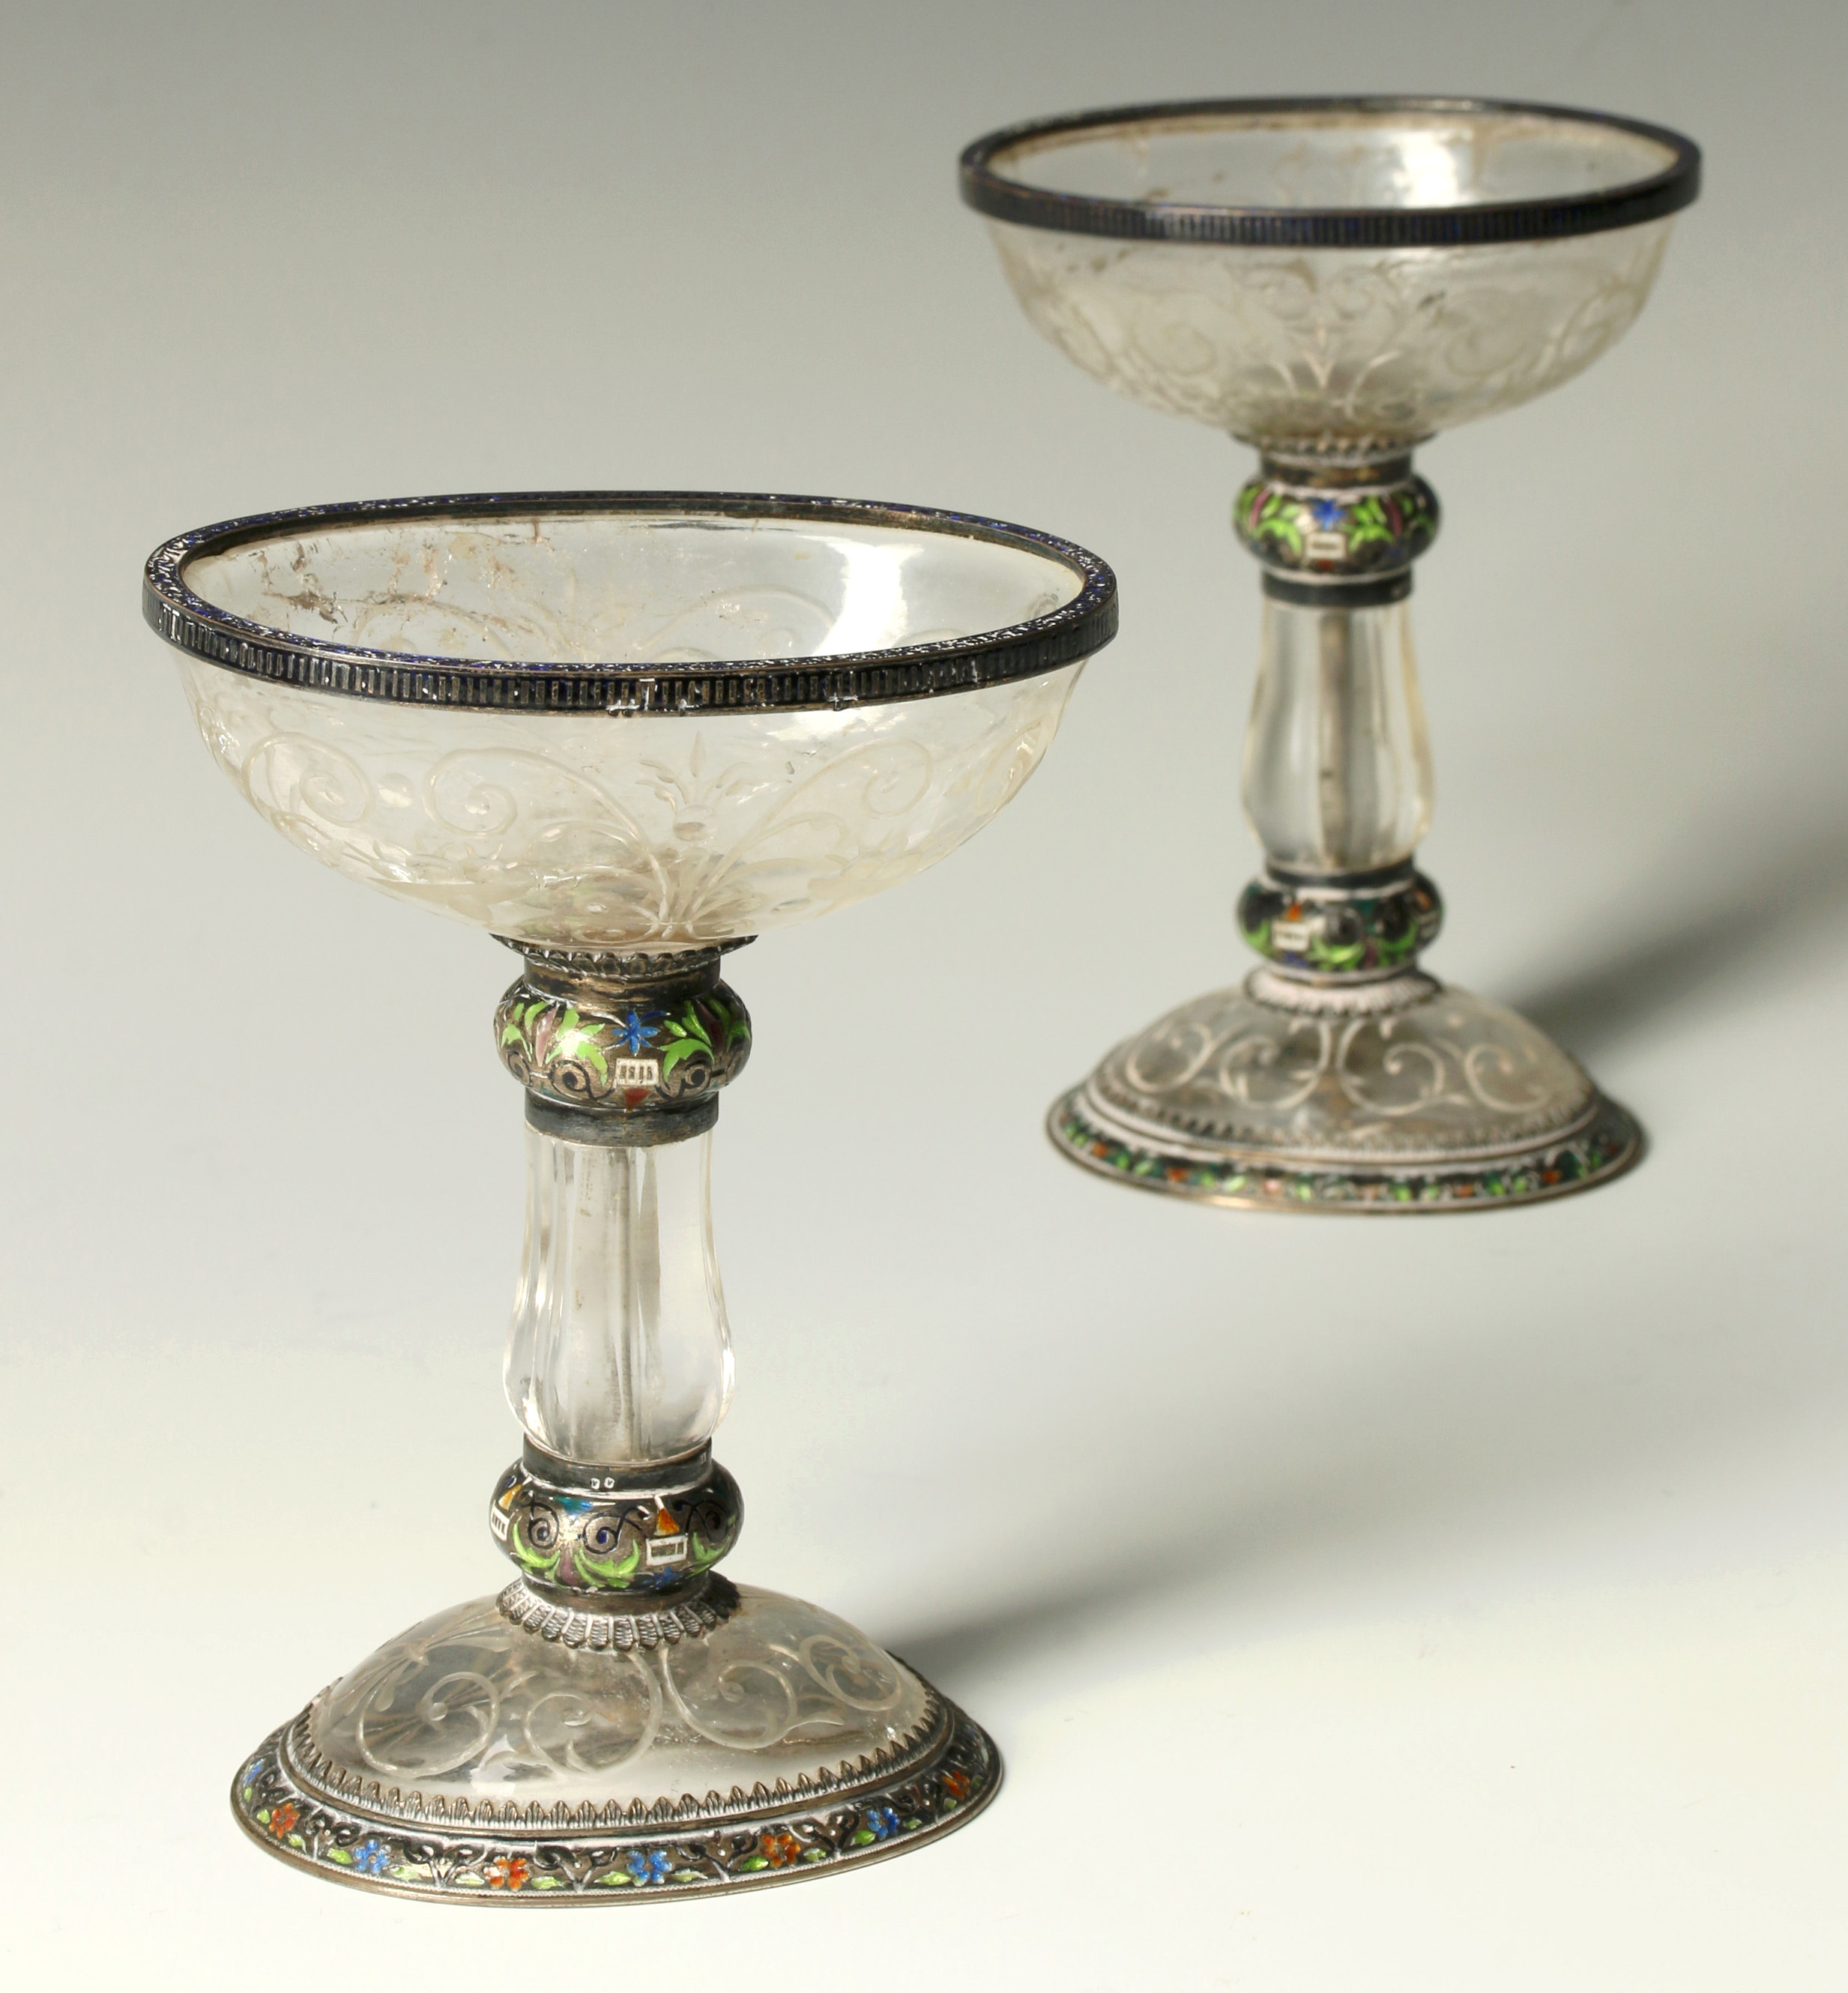 H. BOHM VIENNESE ROCK CRYSTAL AND SILVER ENAMEL TAZZA